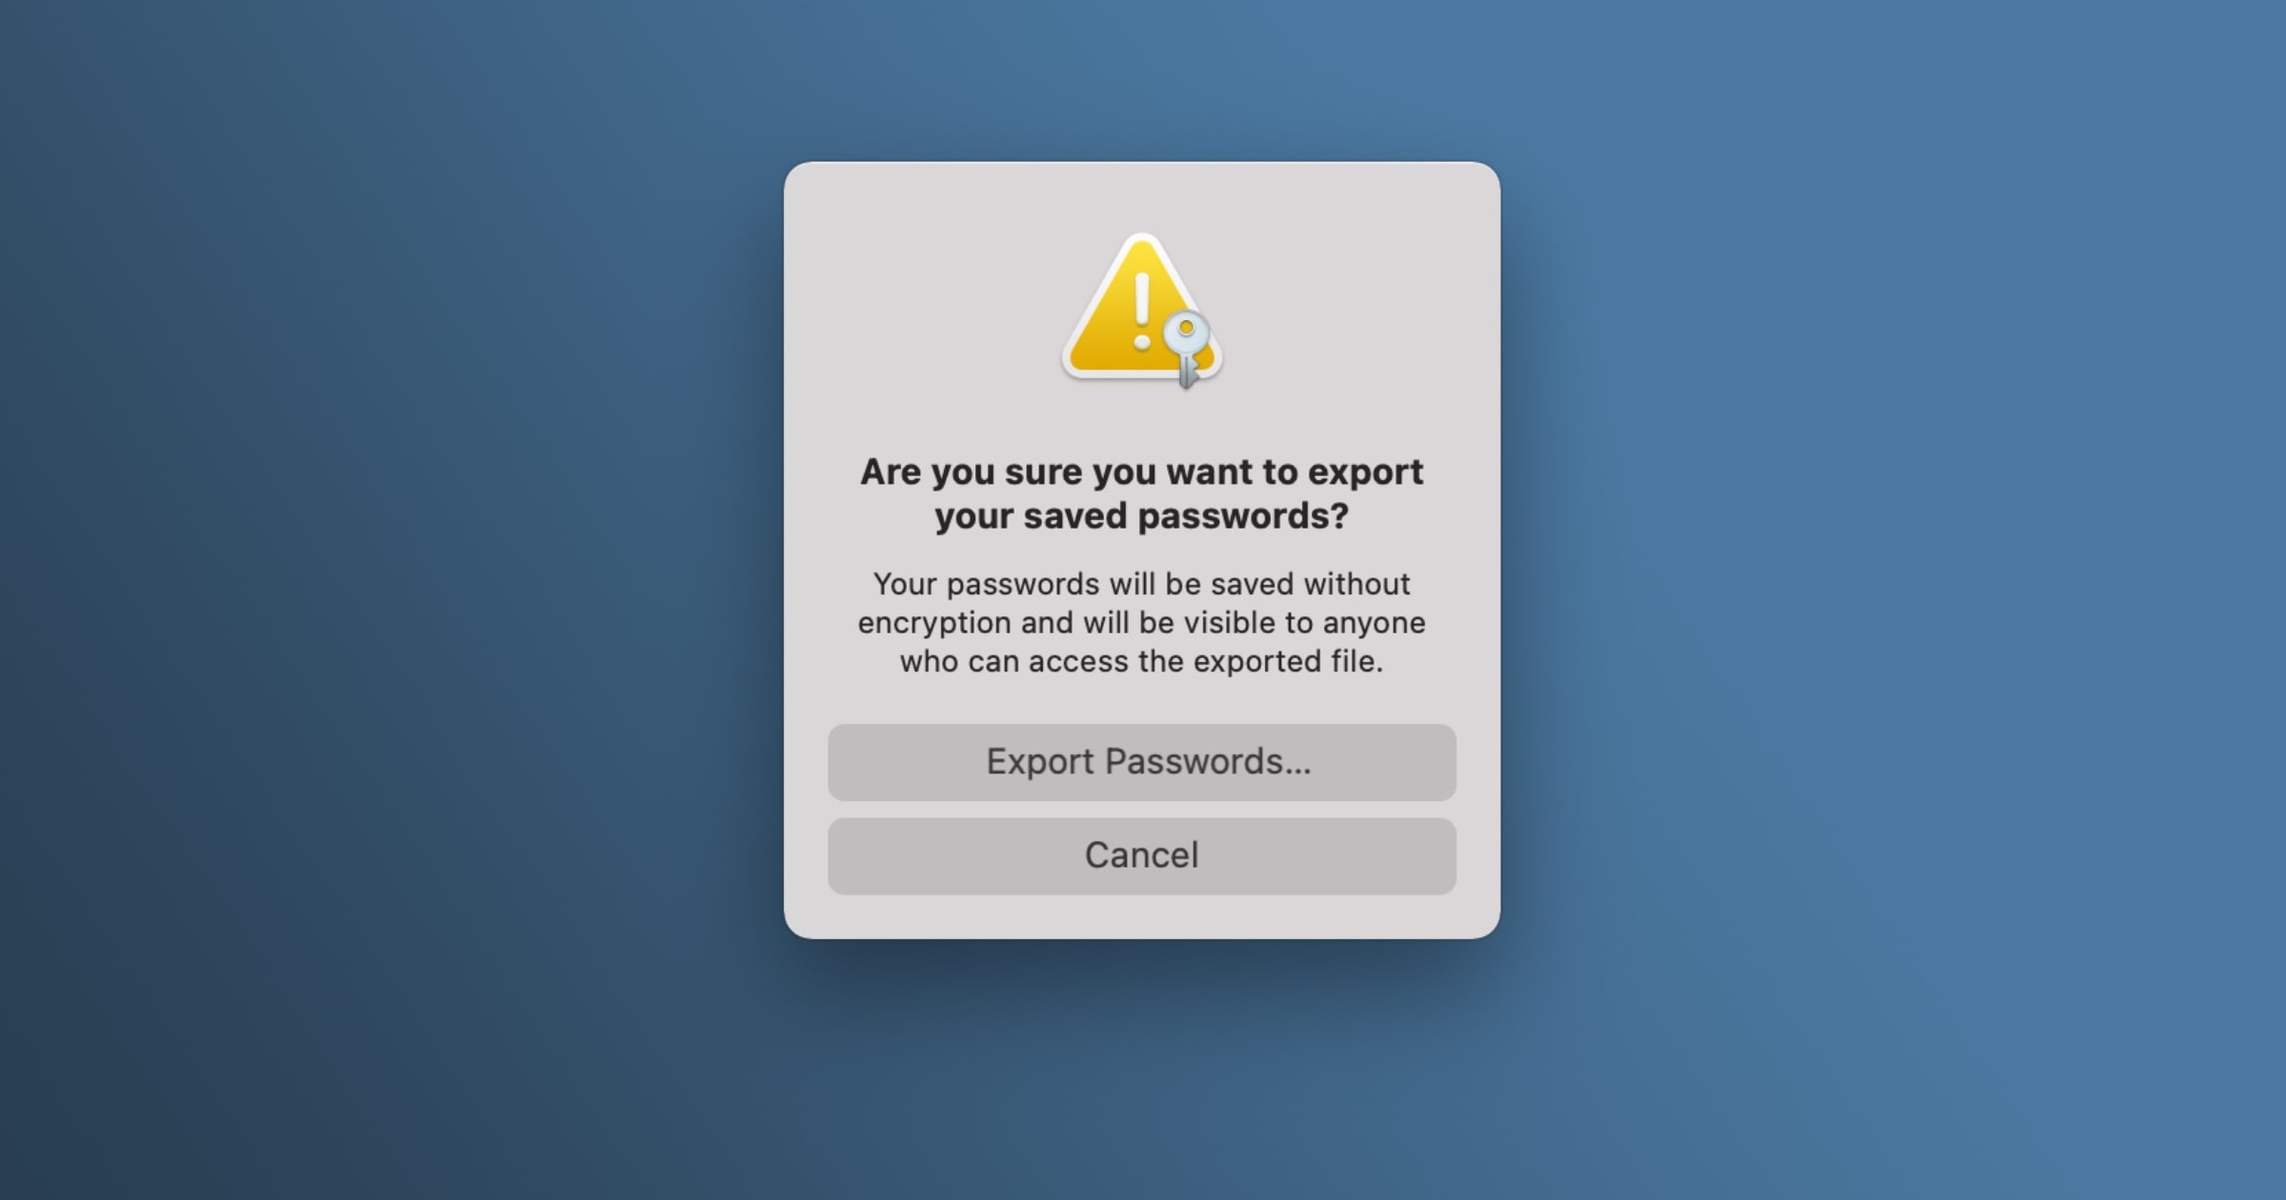 How To Export Passwords From Safari On Mac